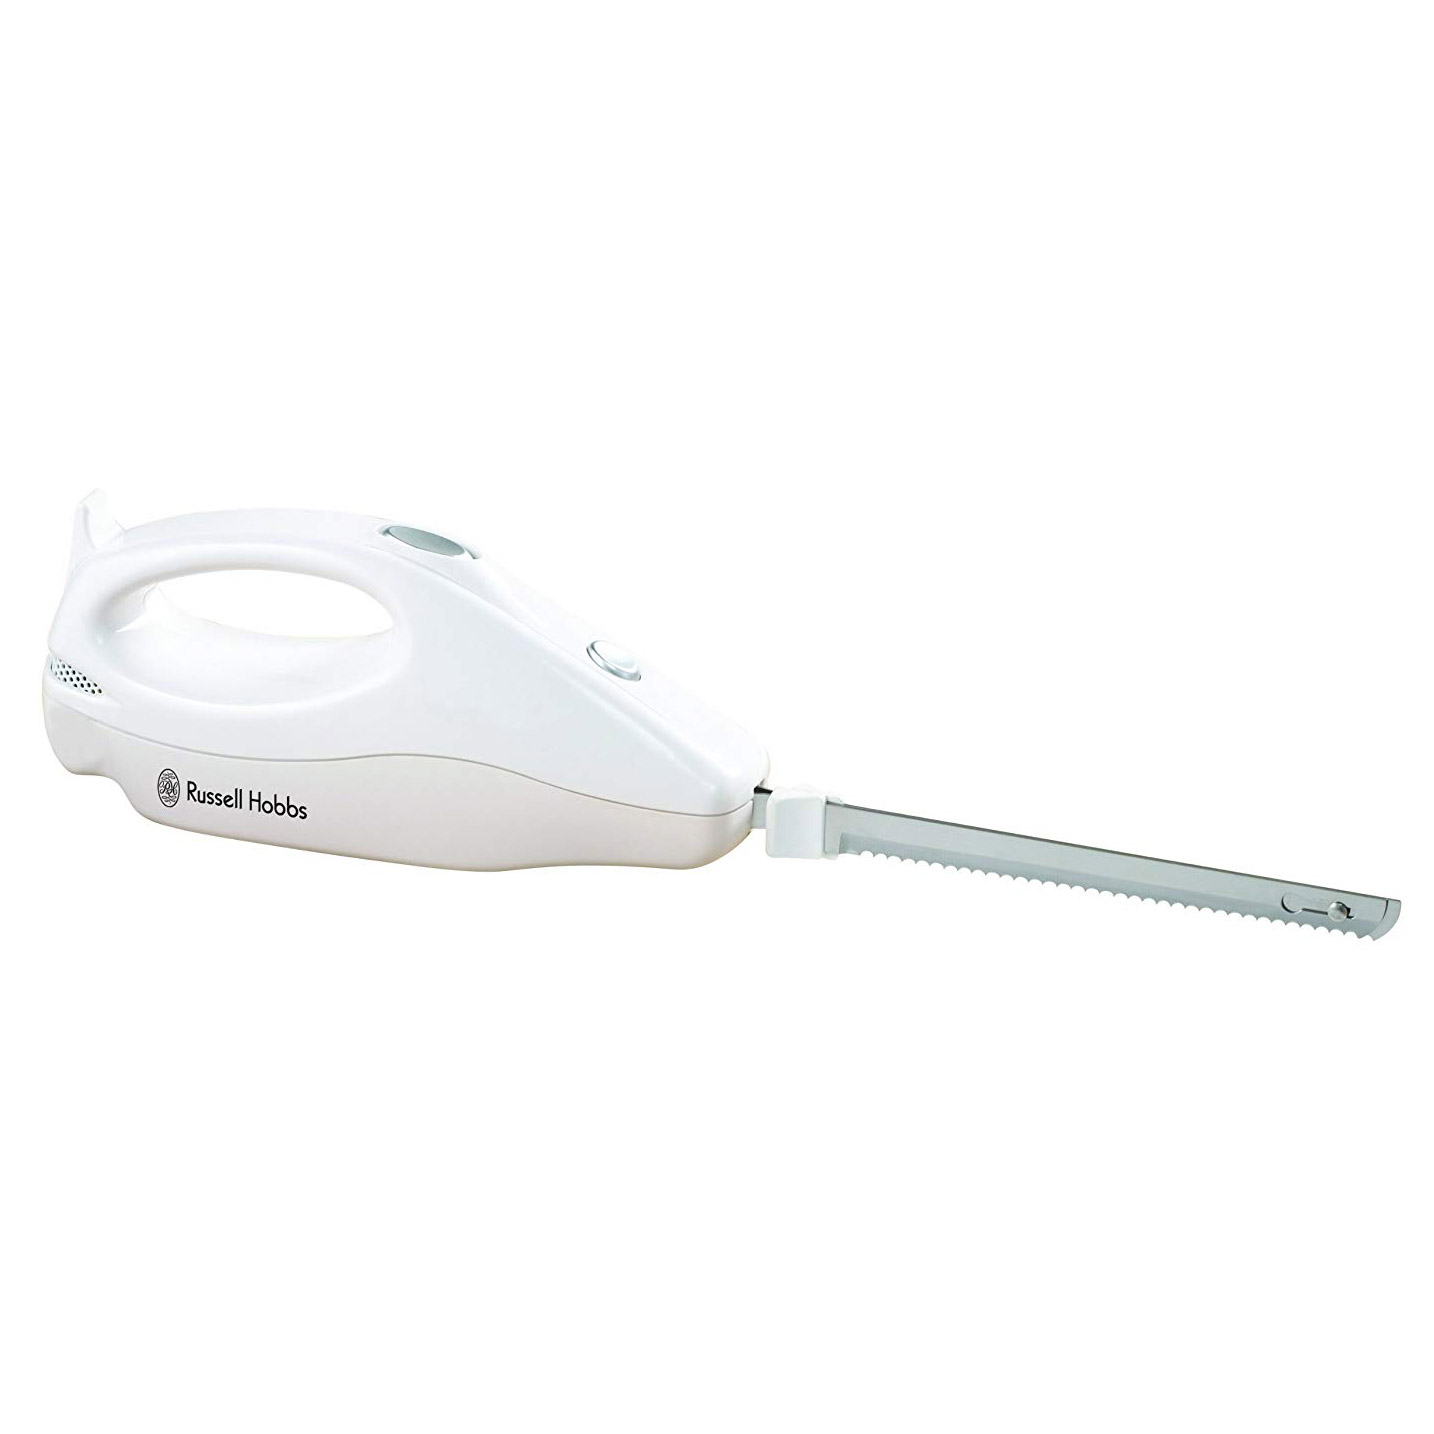 Image of Russell Hobbs 13892 Electric Knife in White 120W